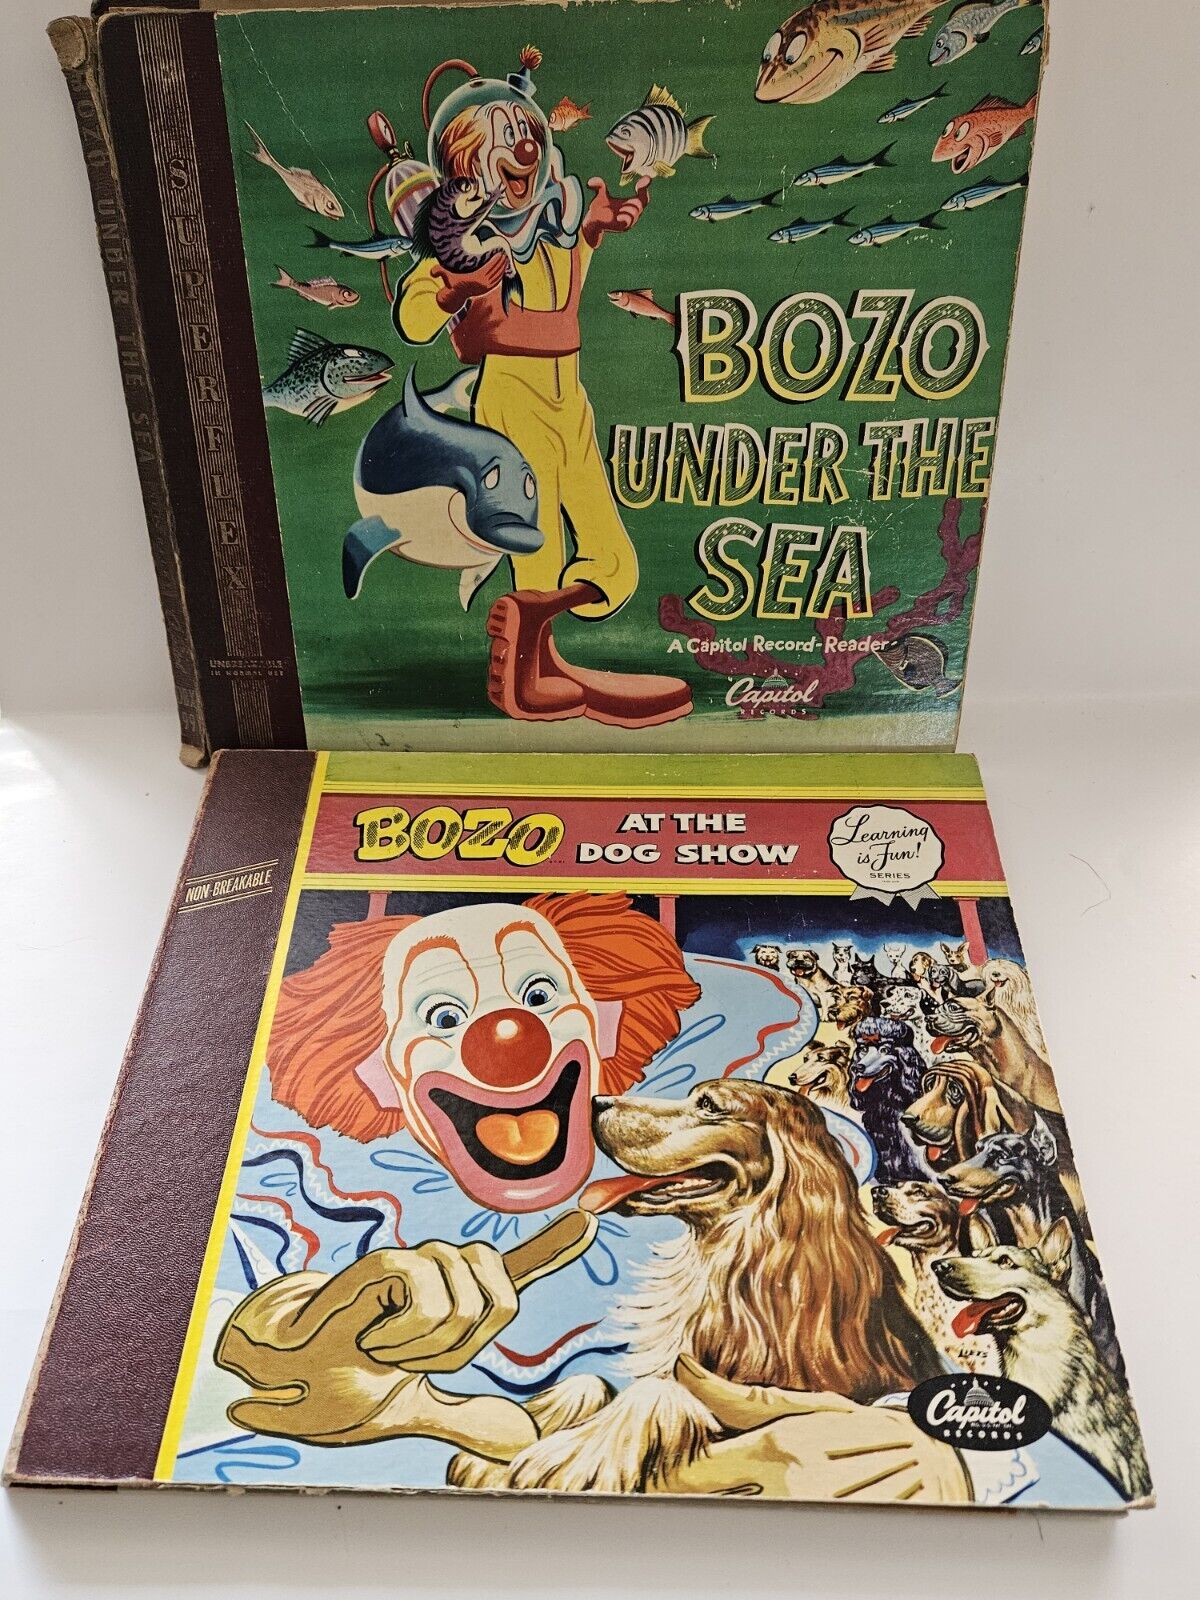 2 Bozo The Clown 1940\'s At the Dog Show & Under the Sea Vintage Records Books